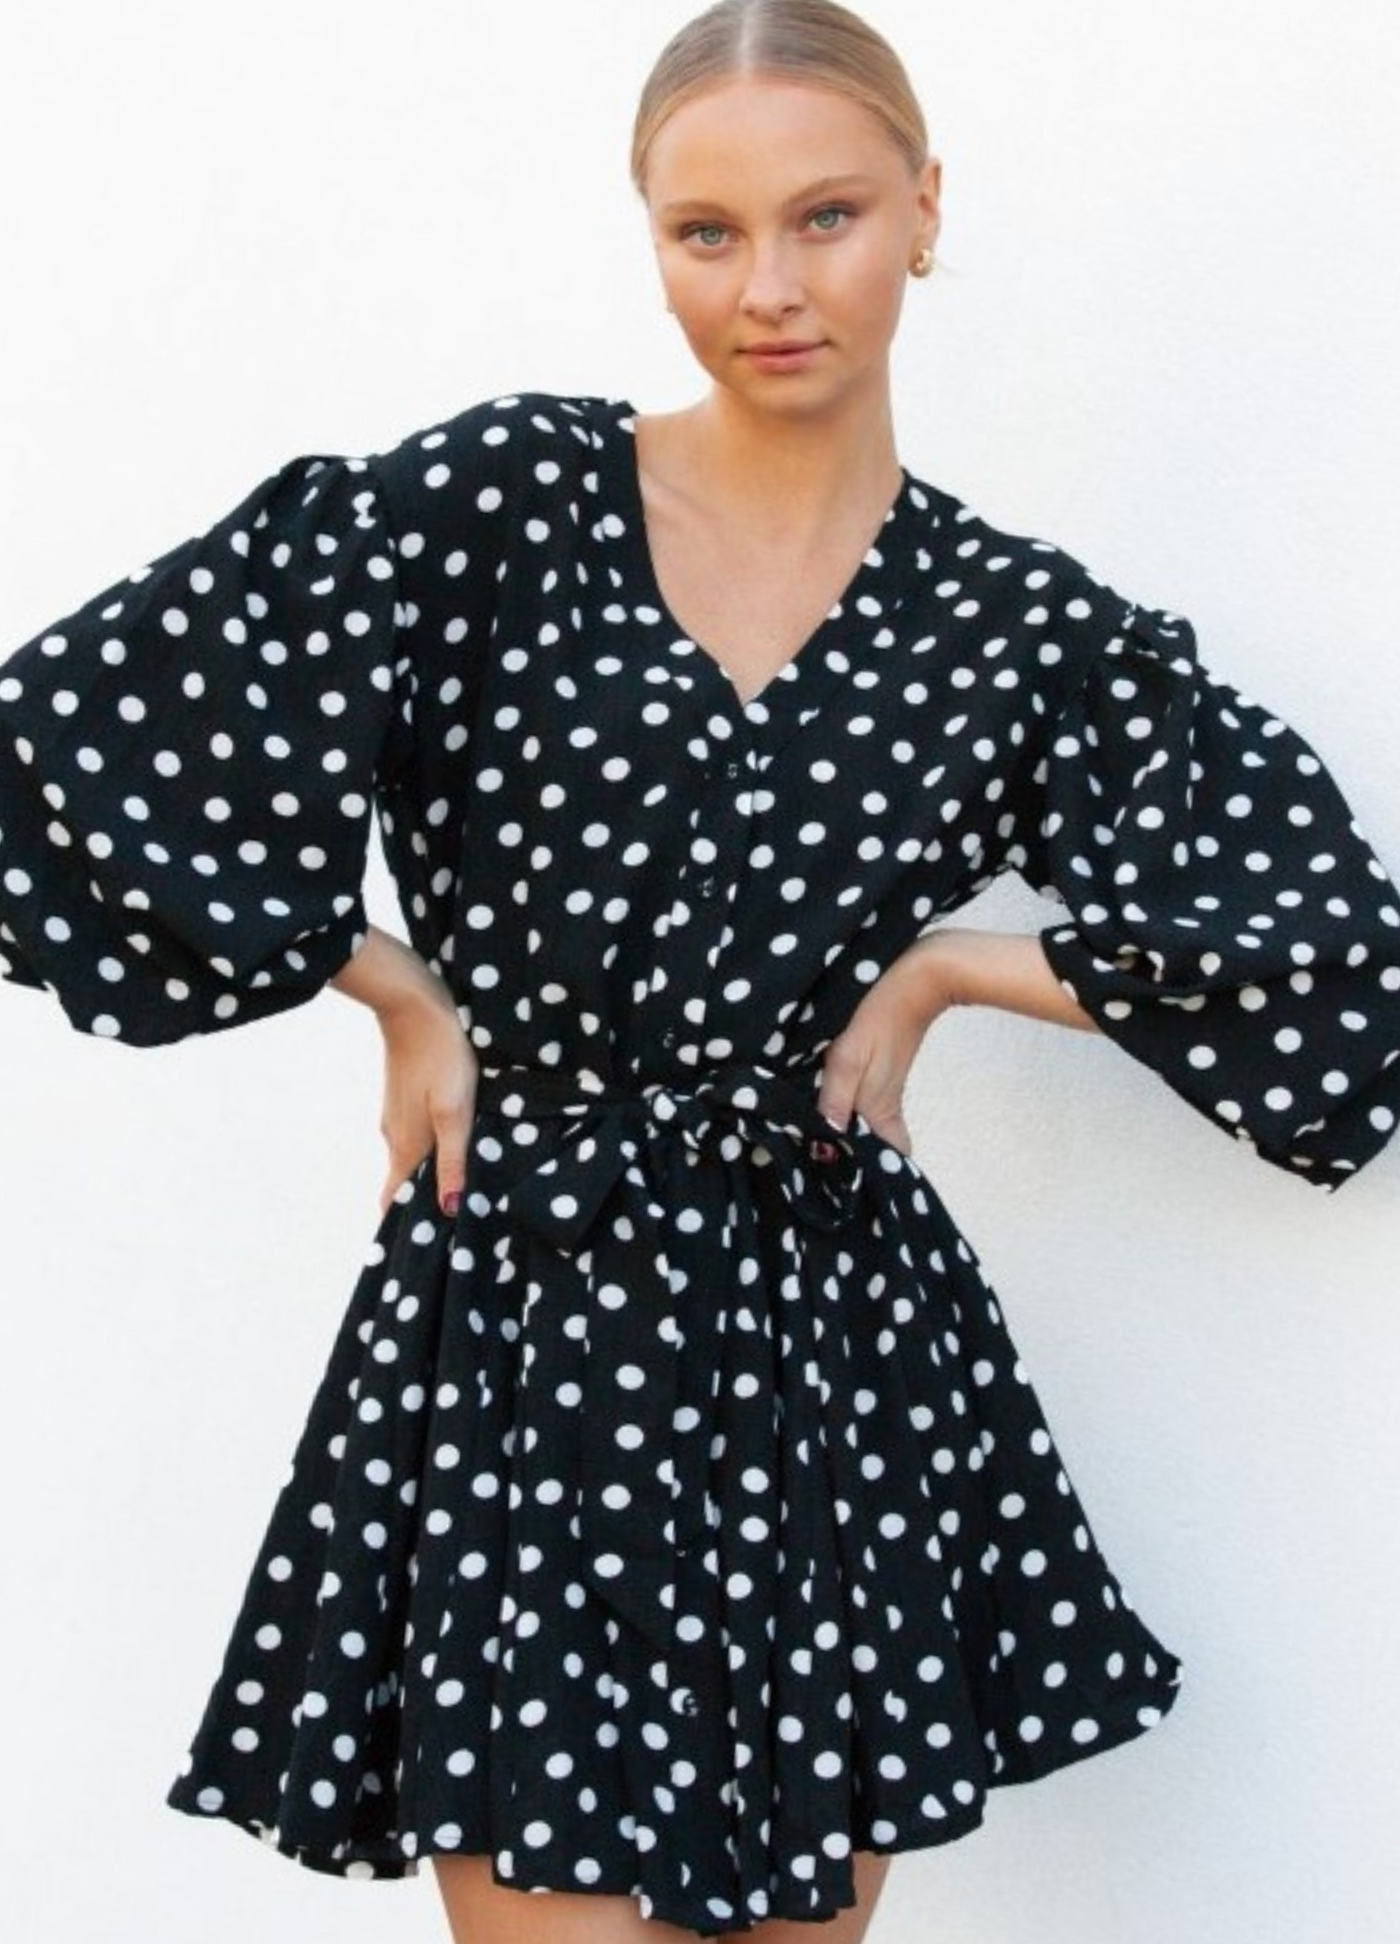 Model wearing black and white polka dot dress with waist belt and buttons